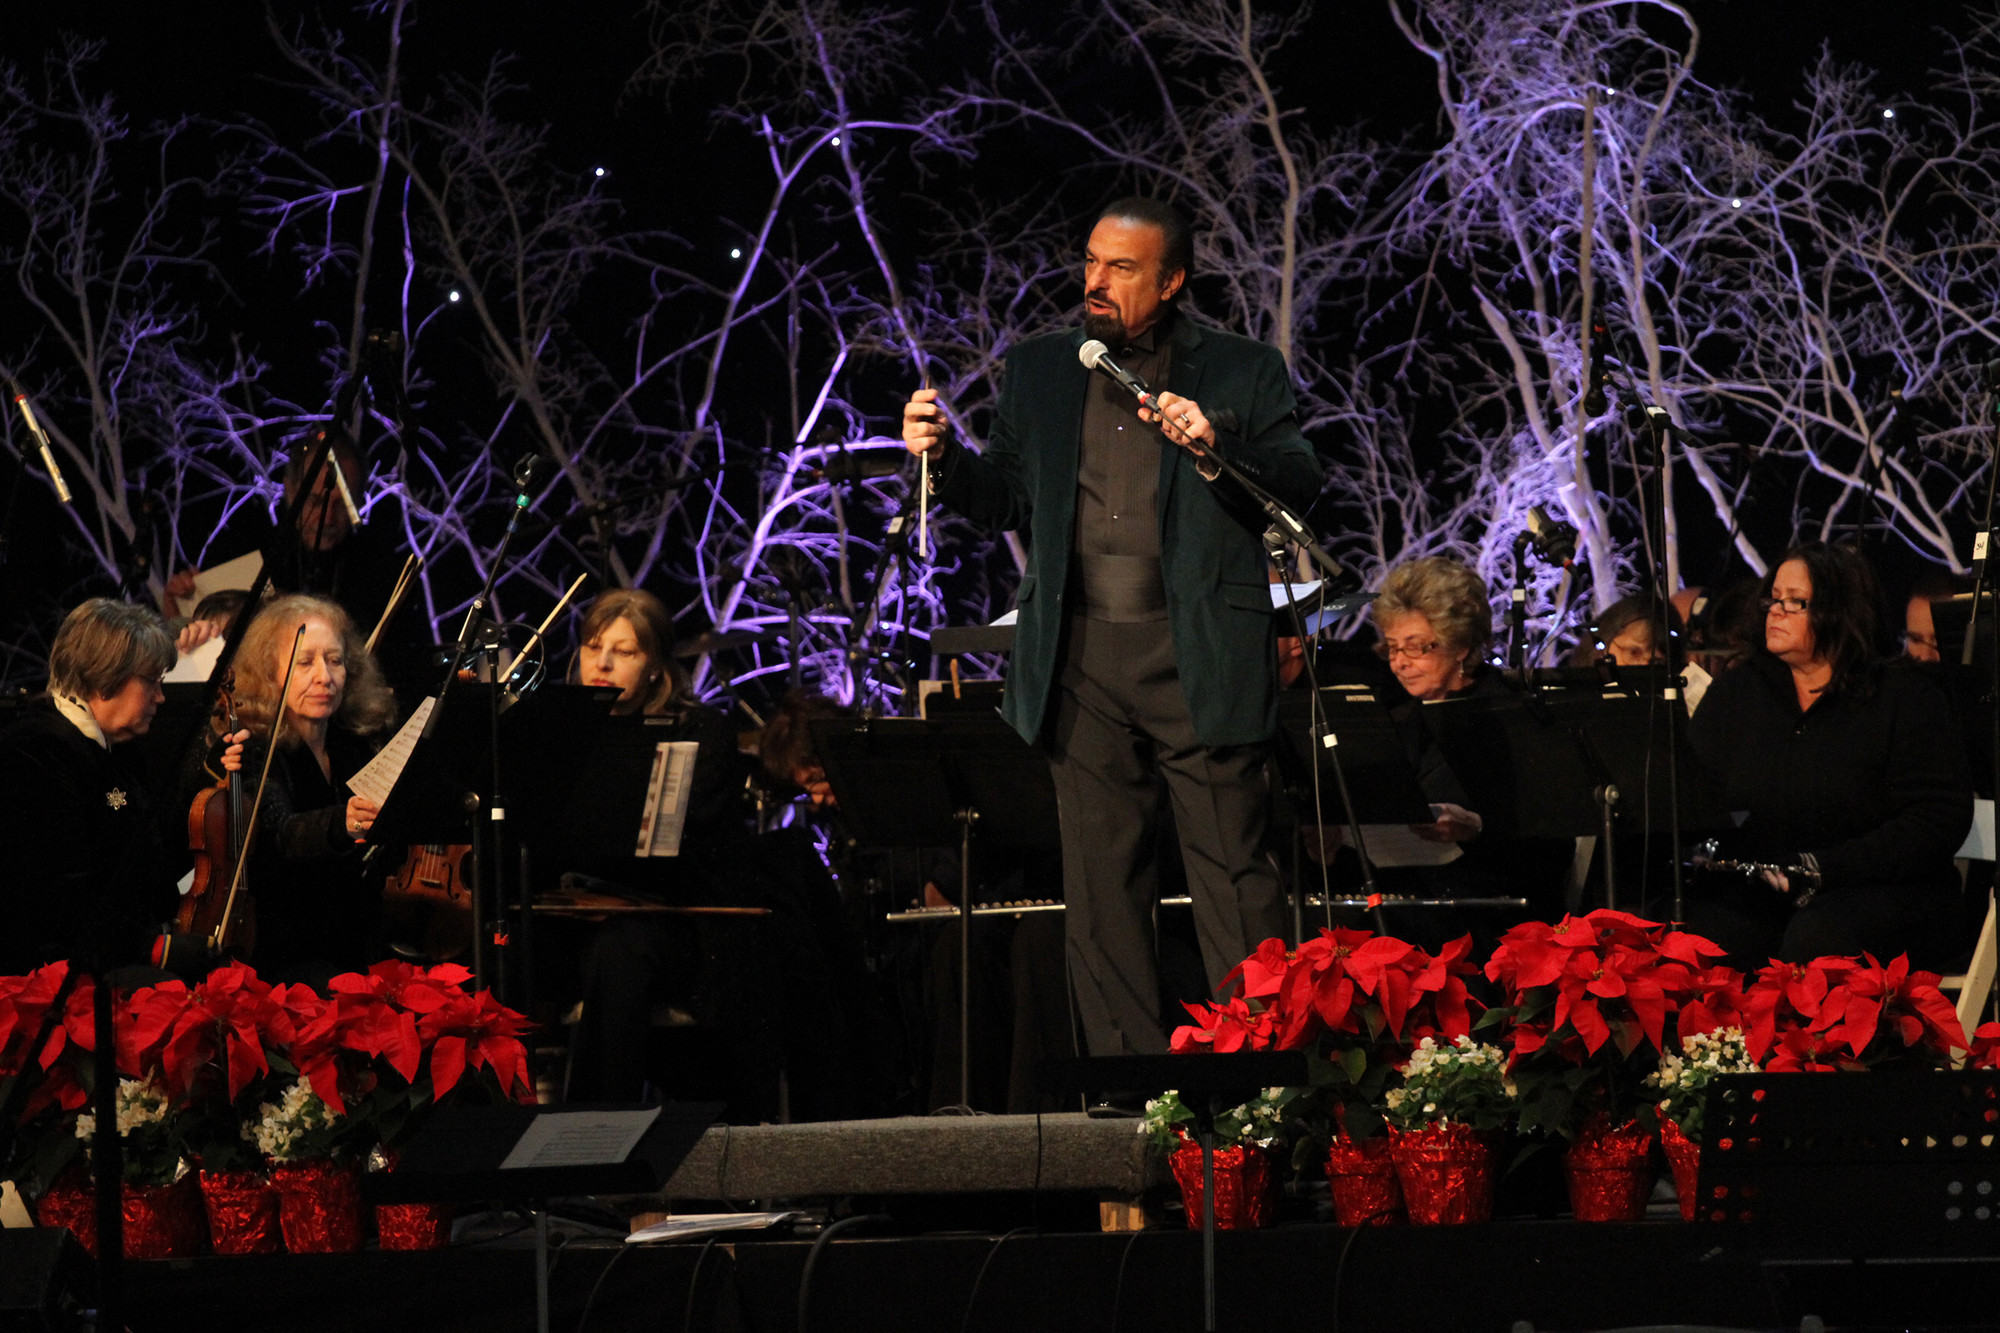 Dean Karahalis and the Concert Pops Orchestra entertained a sellout crowd of 2,700.